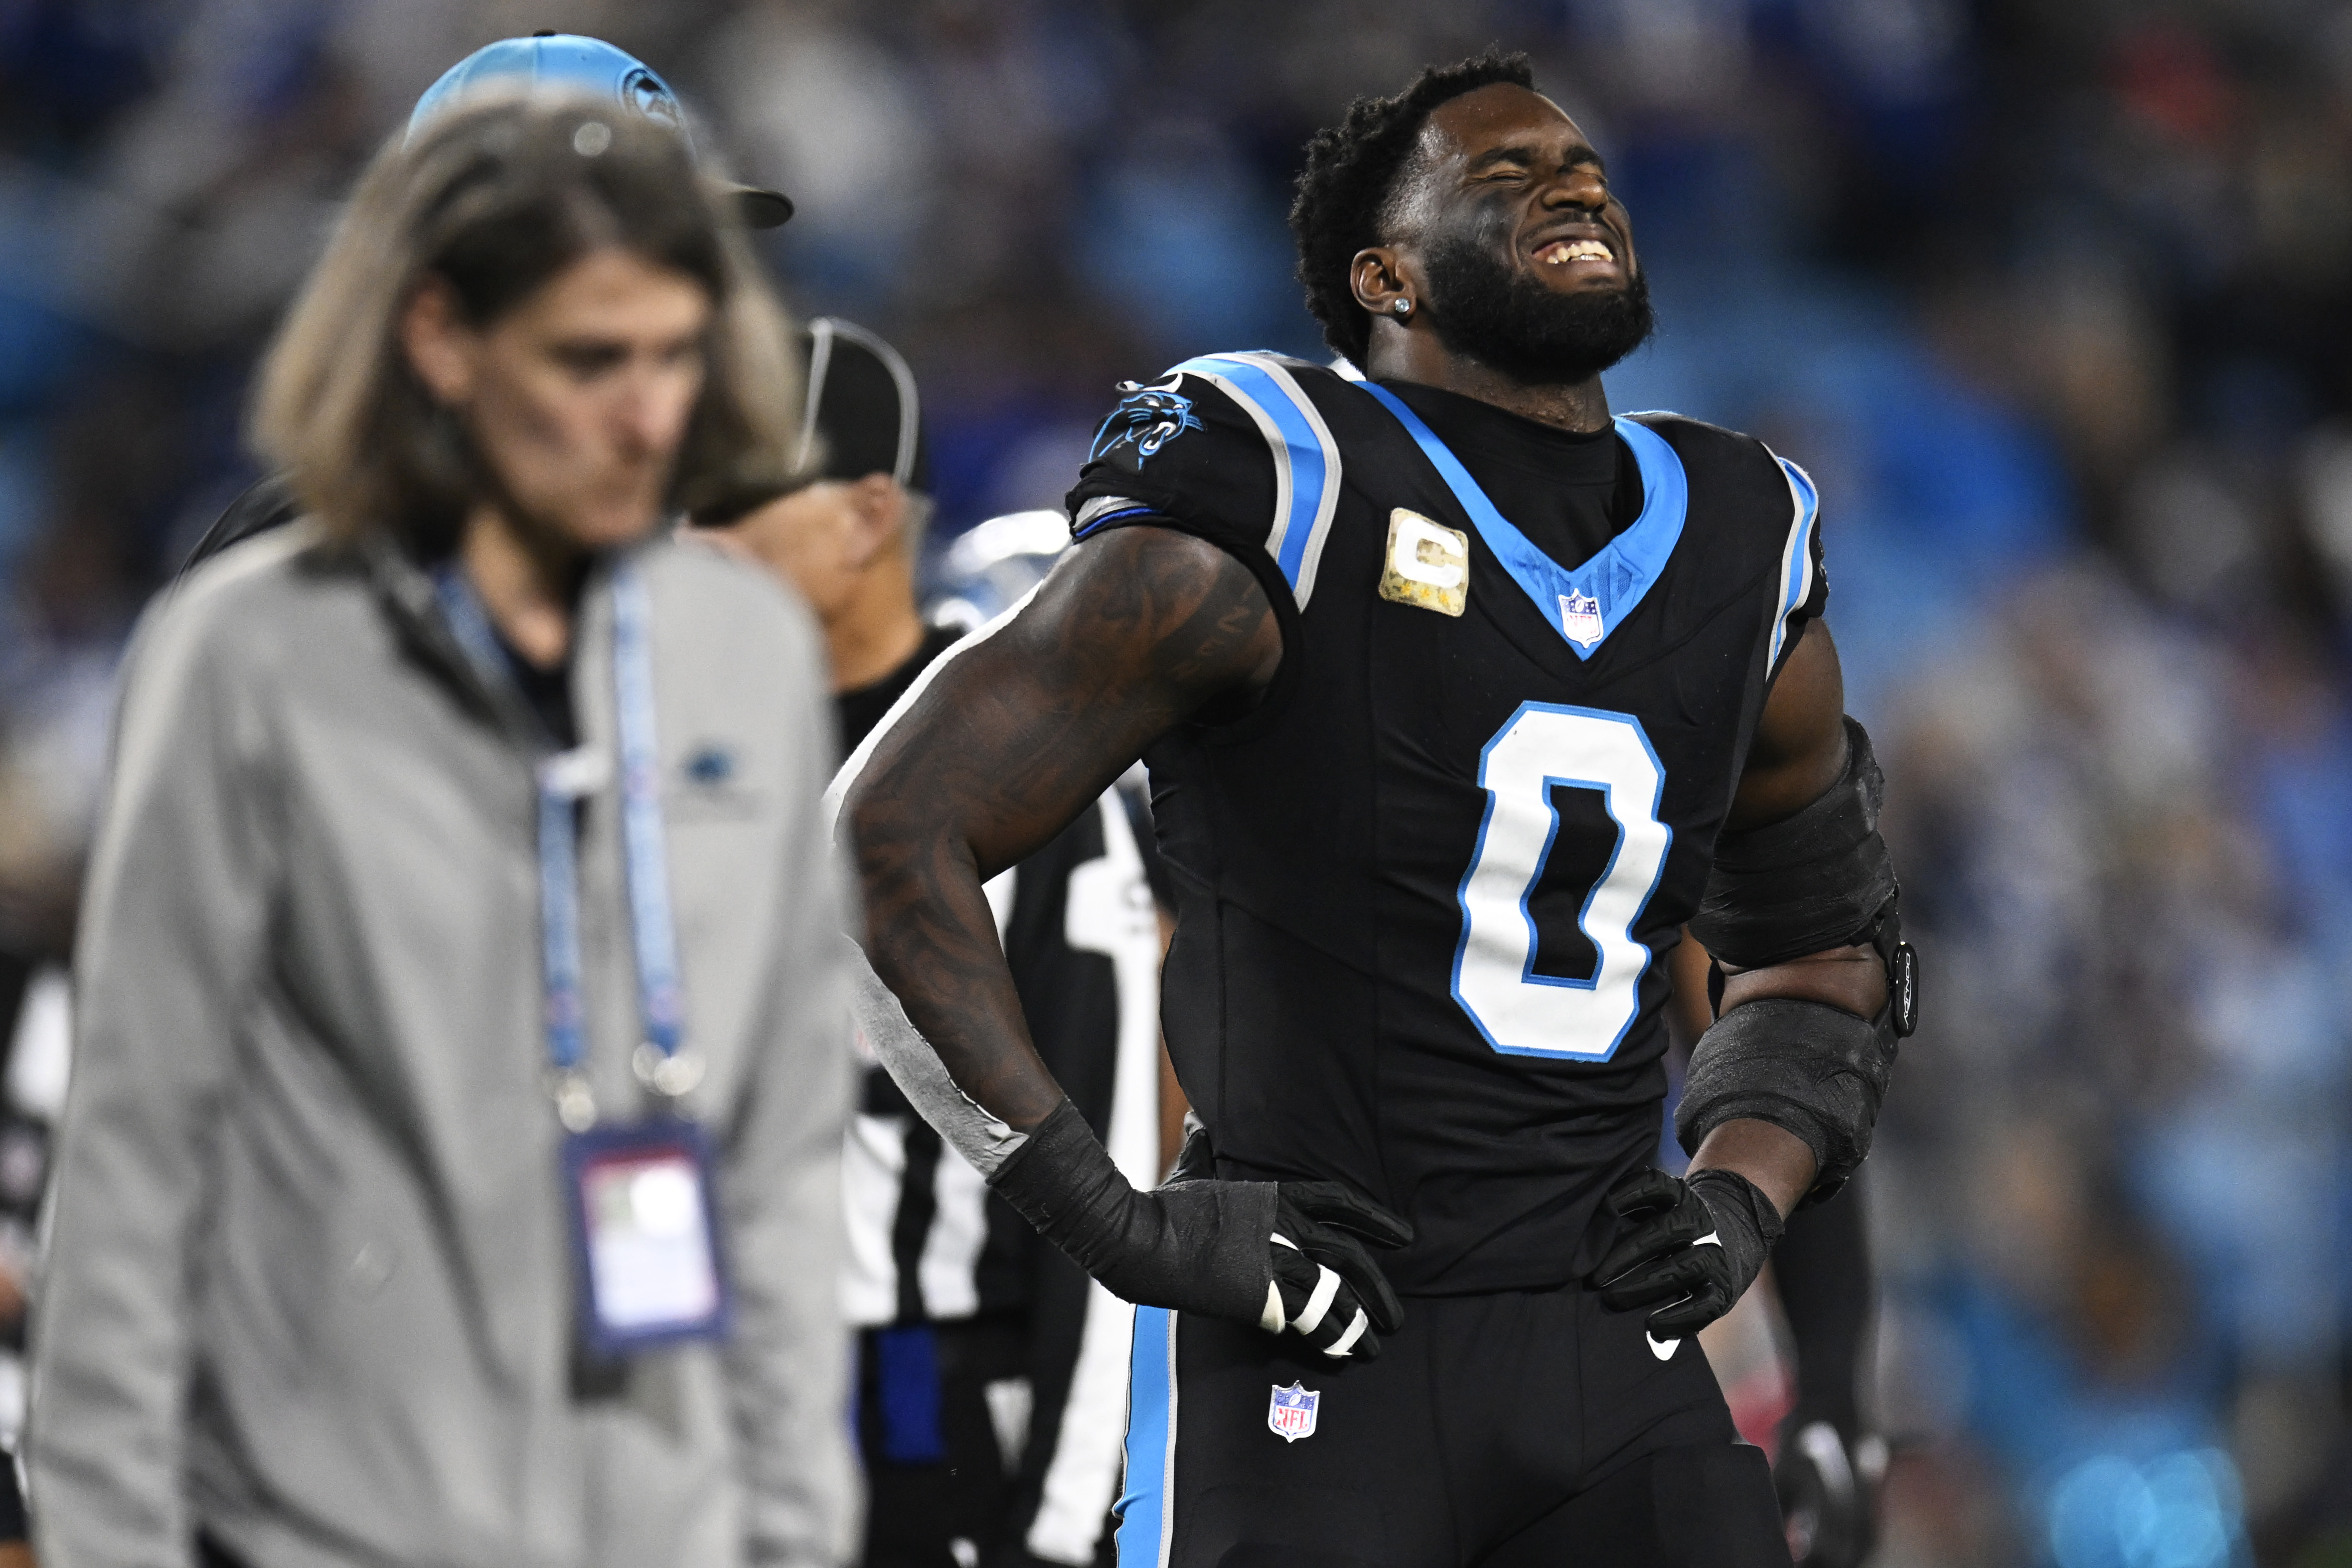 Panthers vs Bears Week 10 TNF injury report: Latest updates on